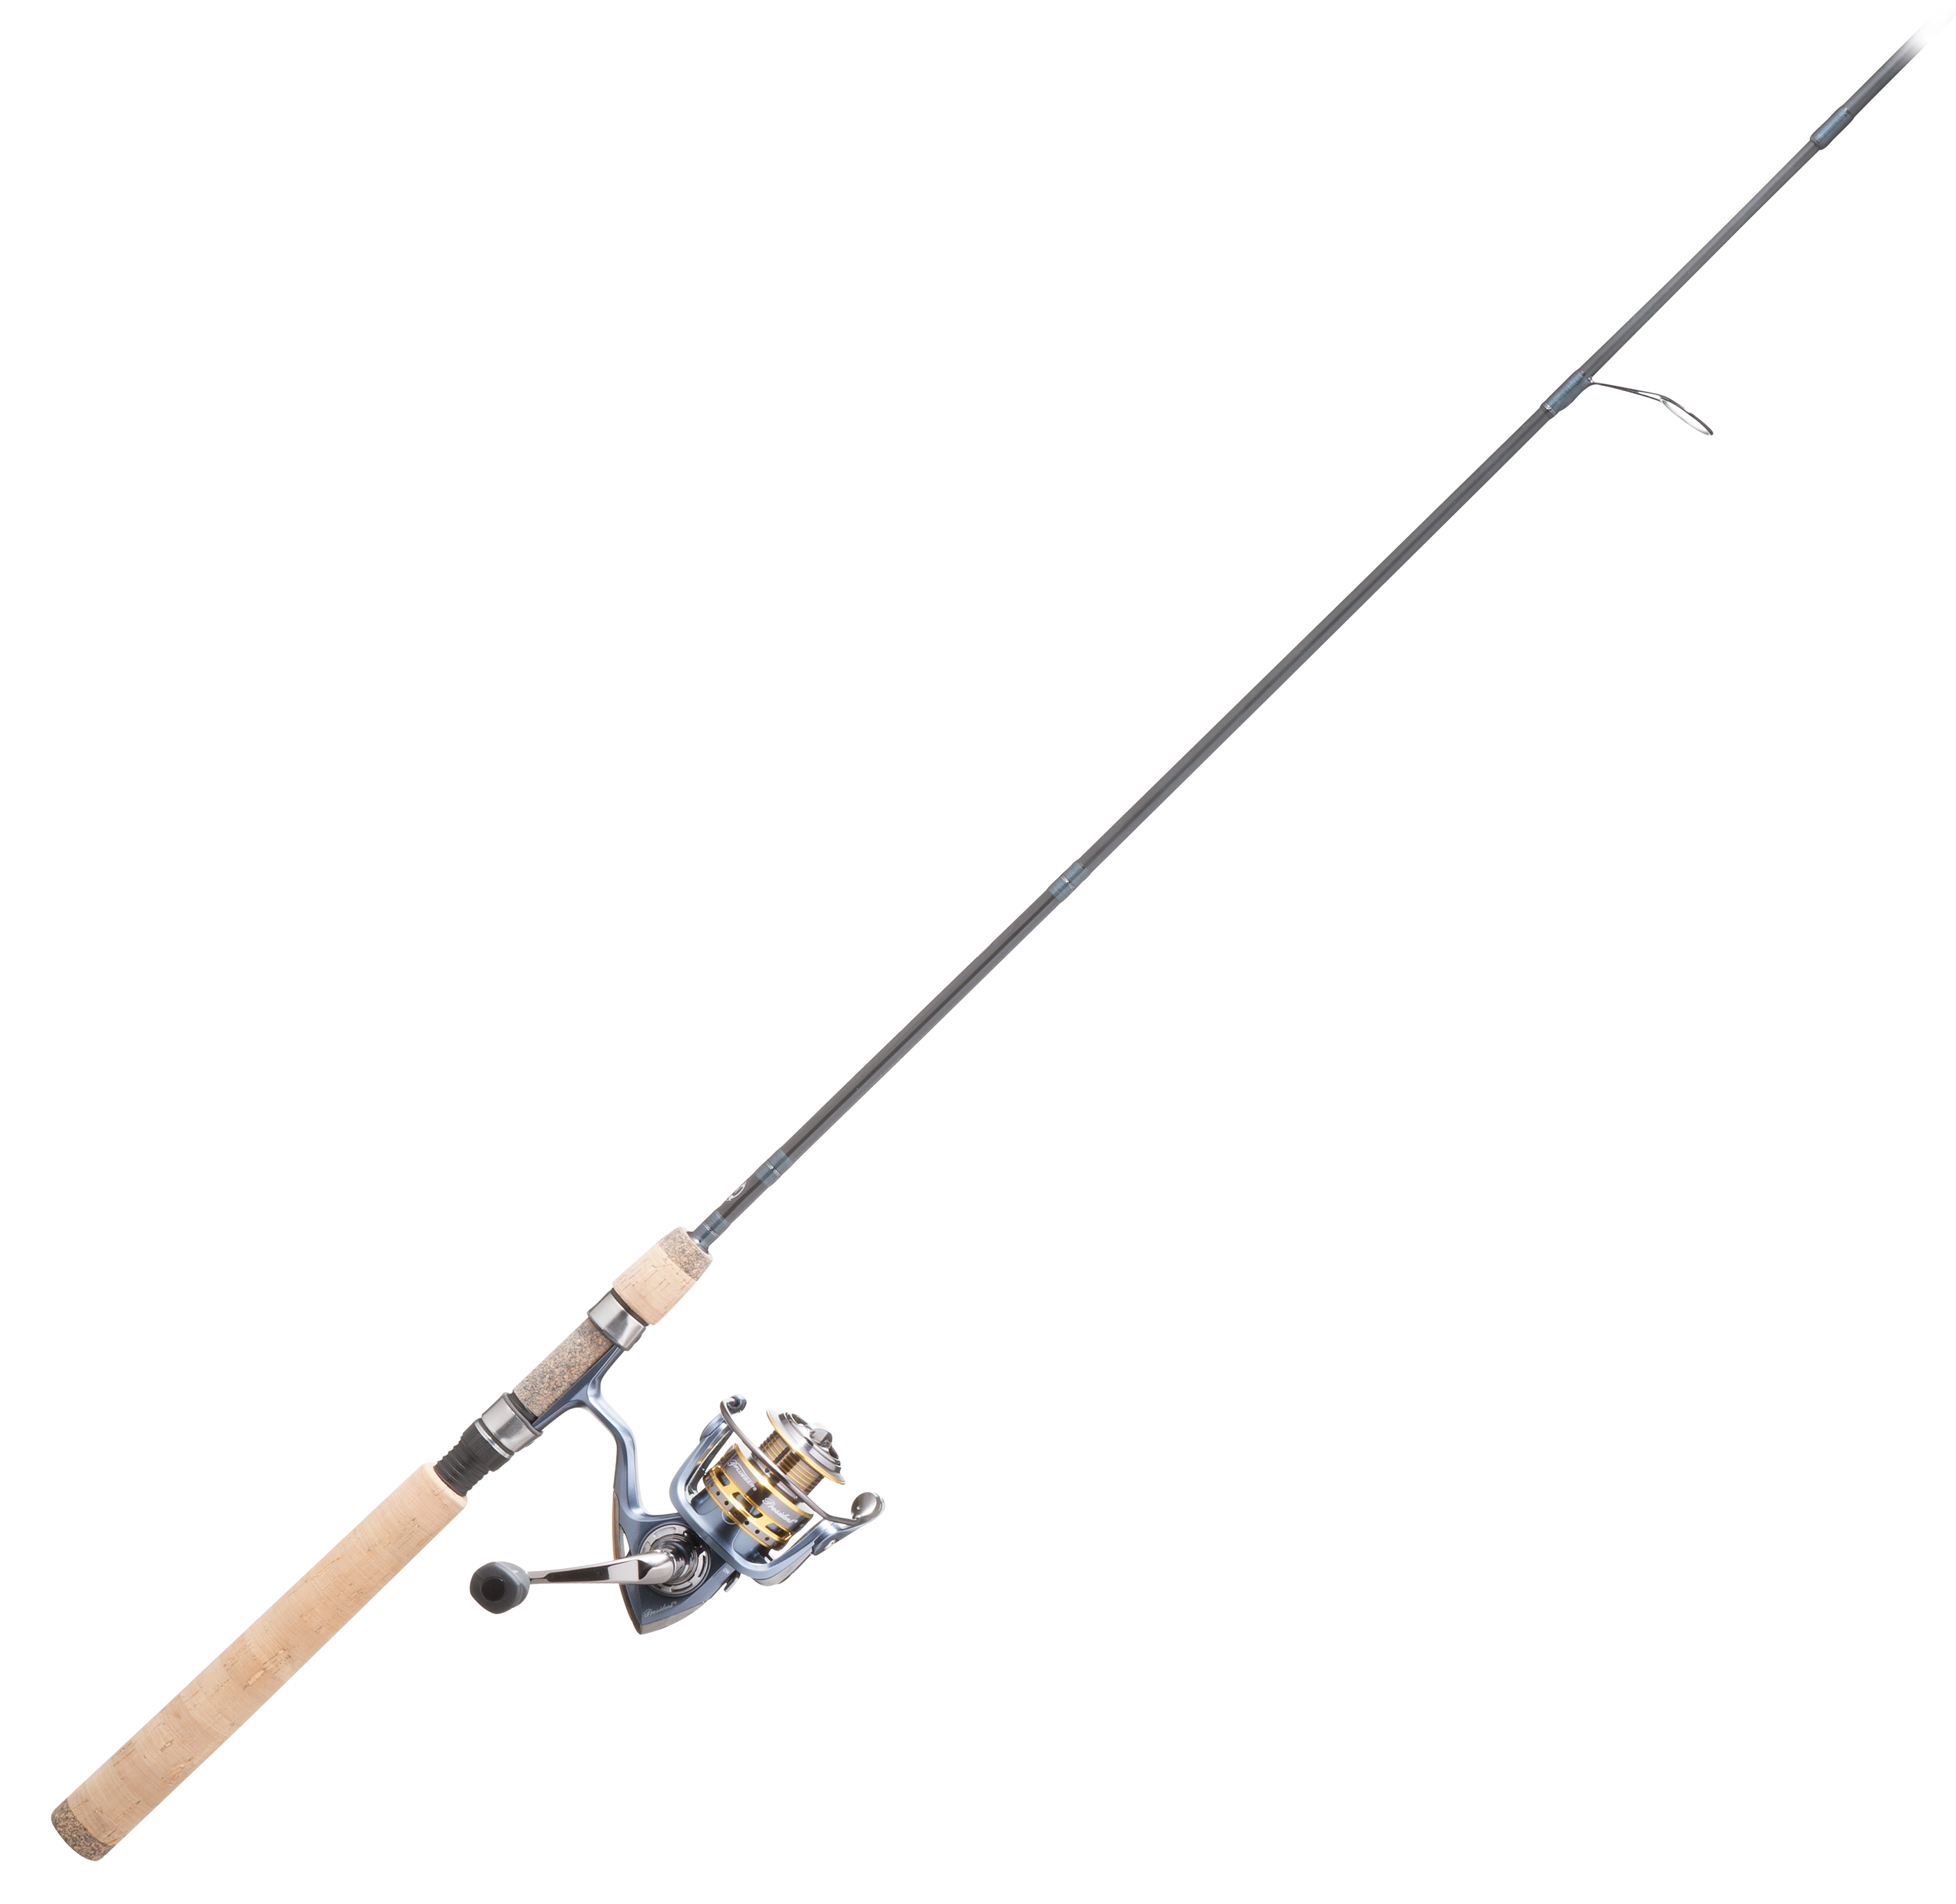 Pflueger President/Bass Pro Shops Micro Lite Spinning Rod and Reel Combo - Model PRESSP20X/MIL66MS-4